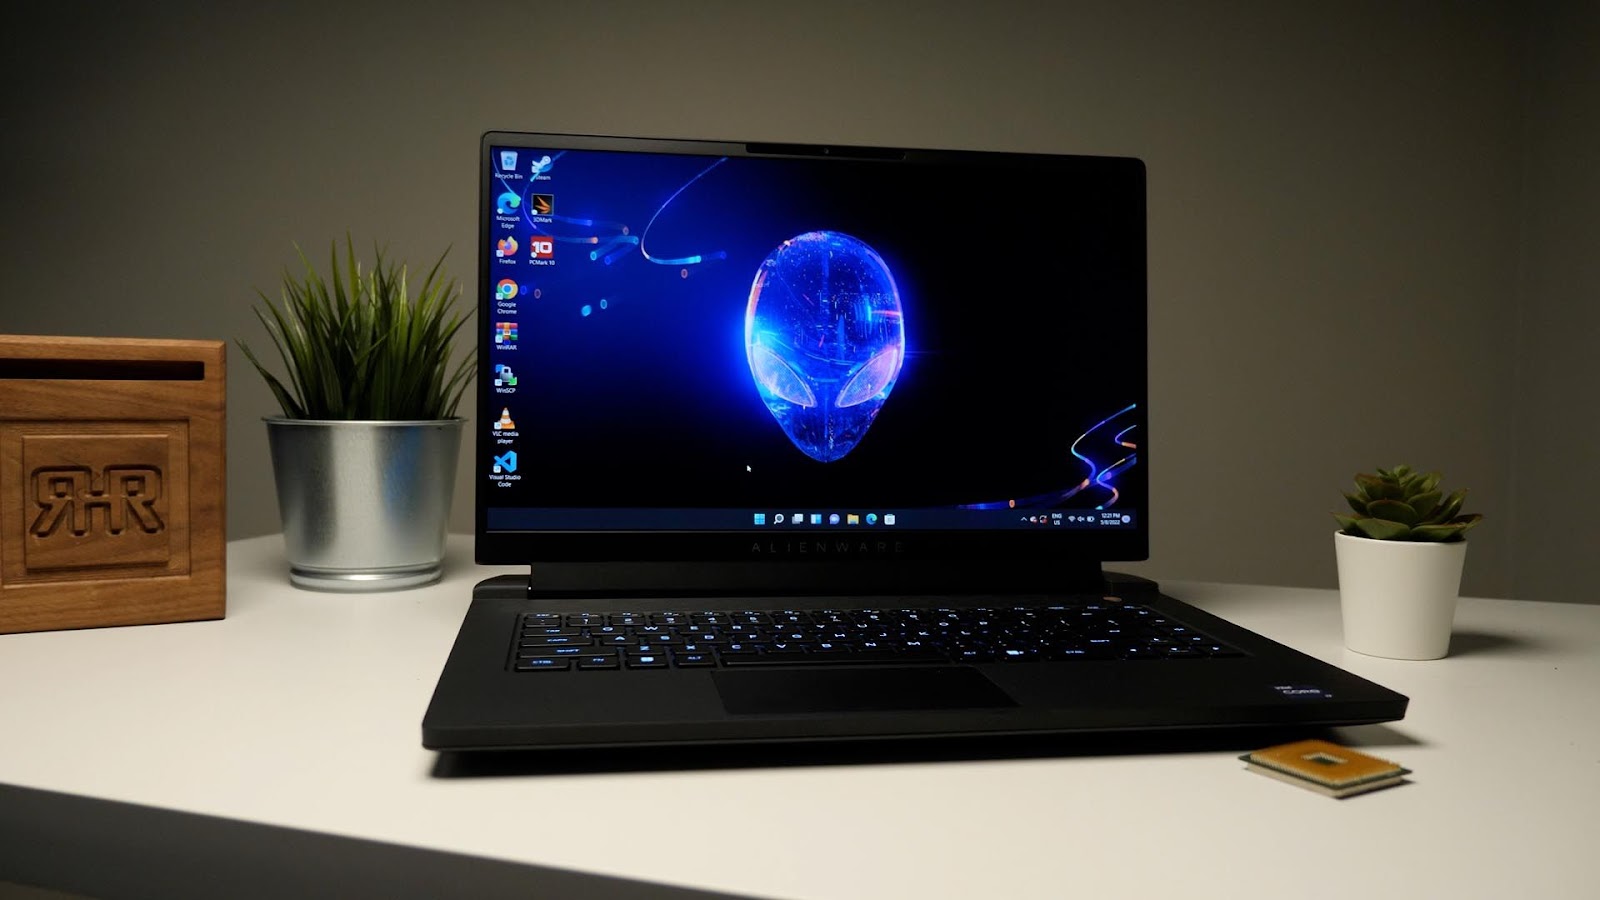 This image shows the Alienware M15 R7 on the table.